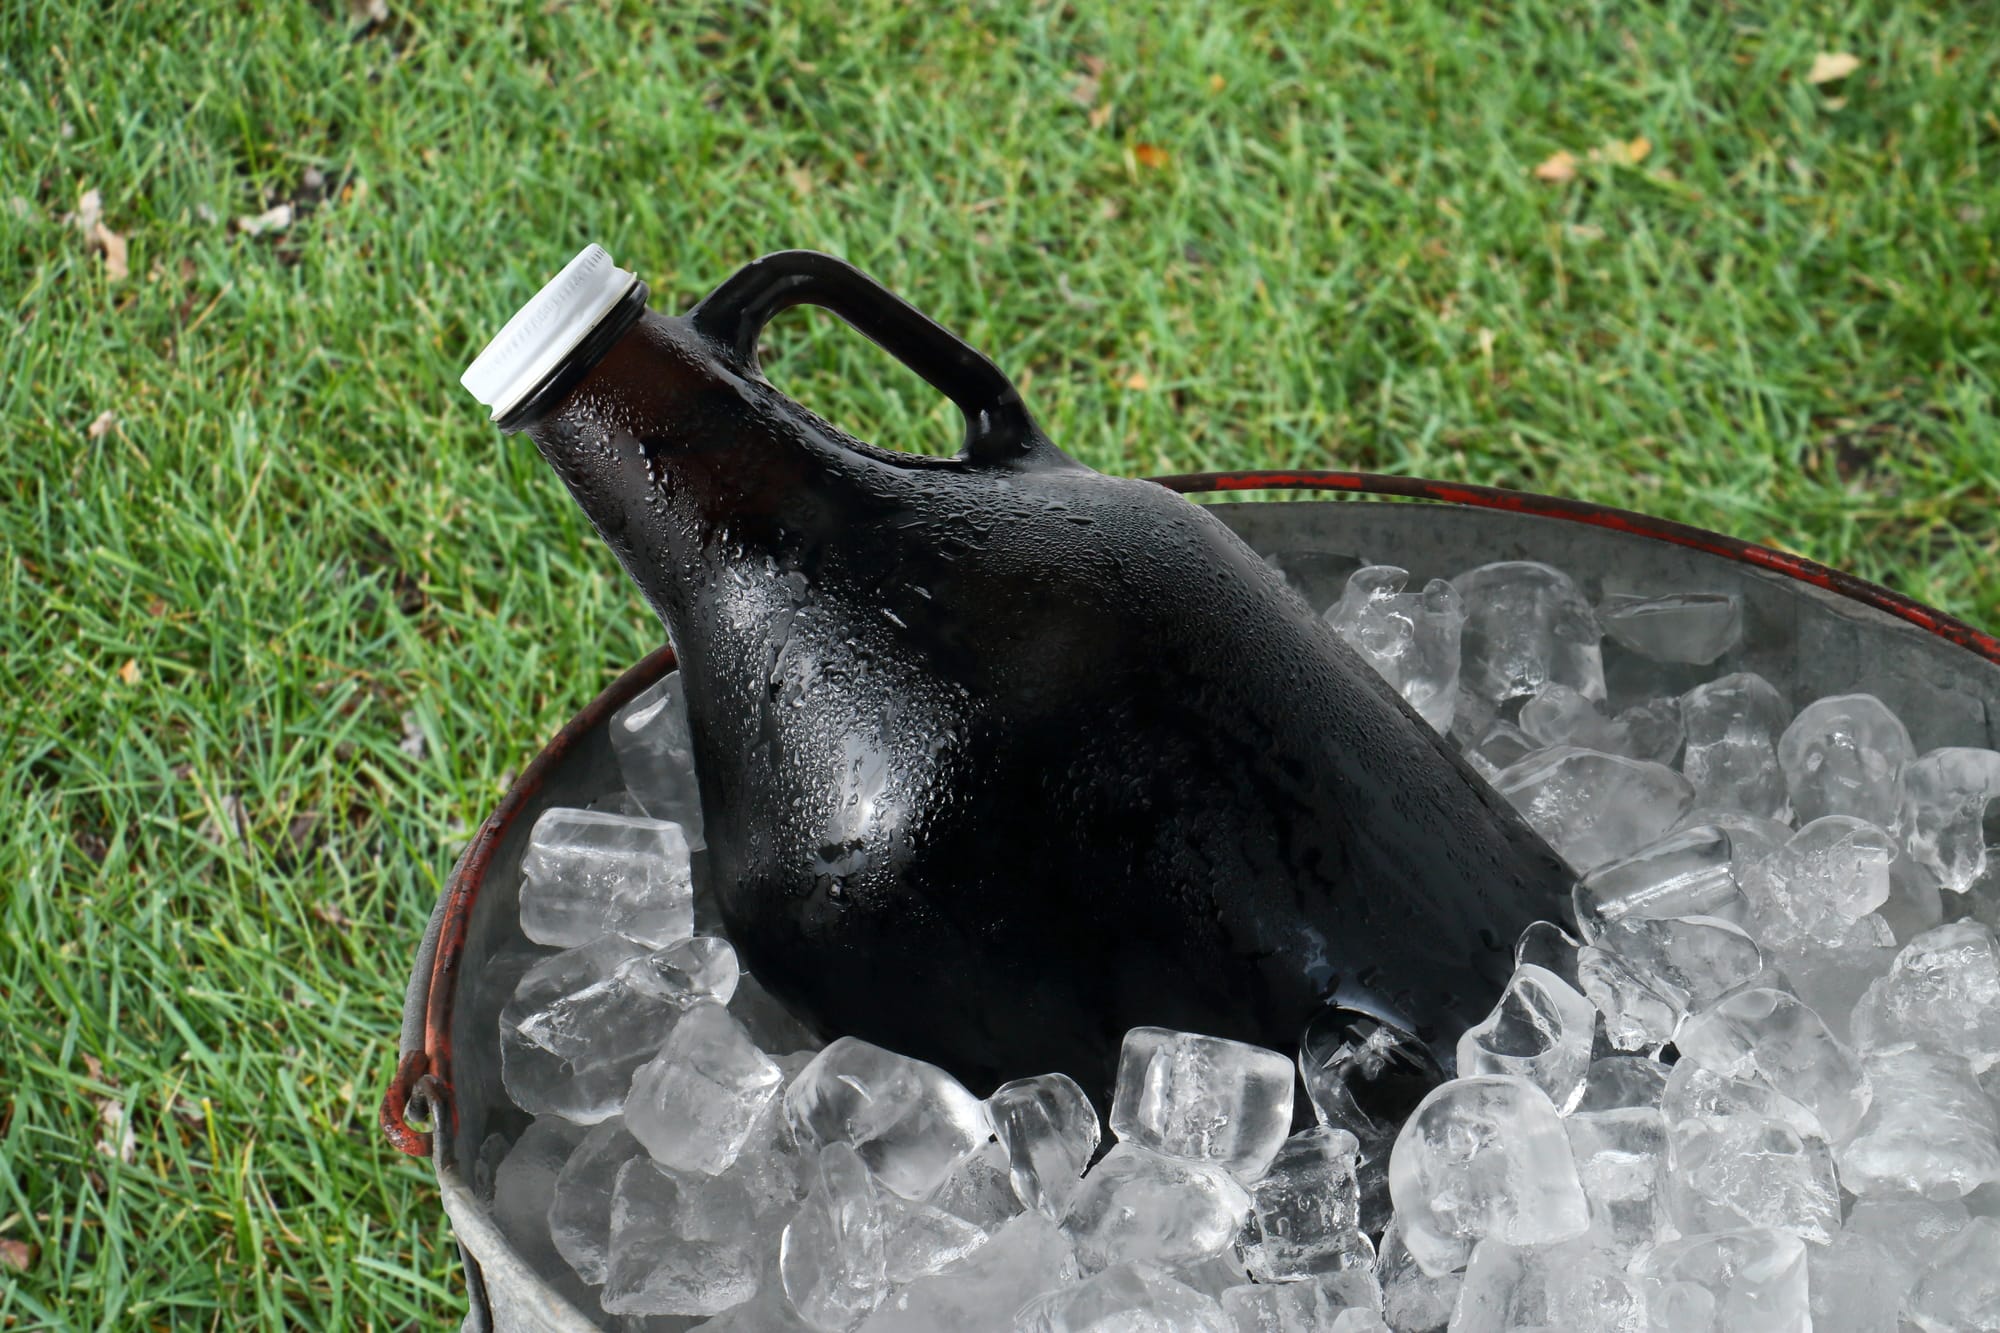 growler in a bucket of ice